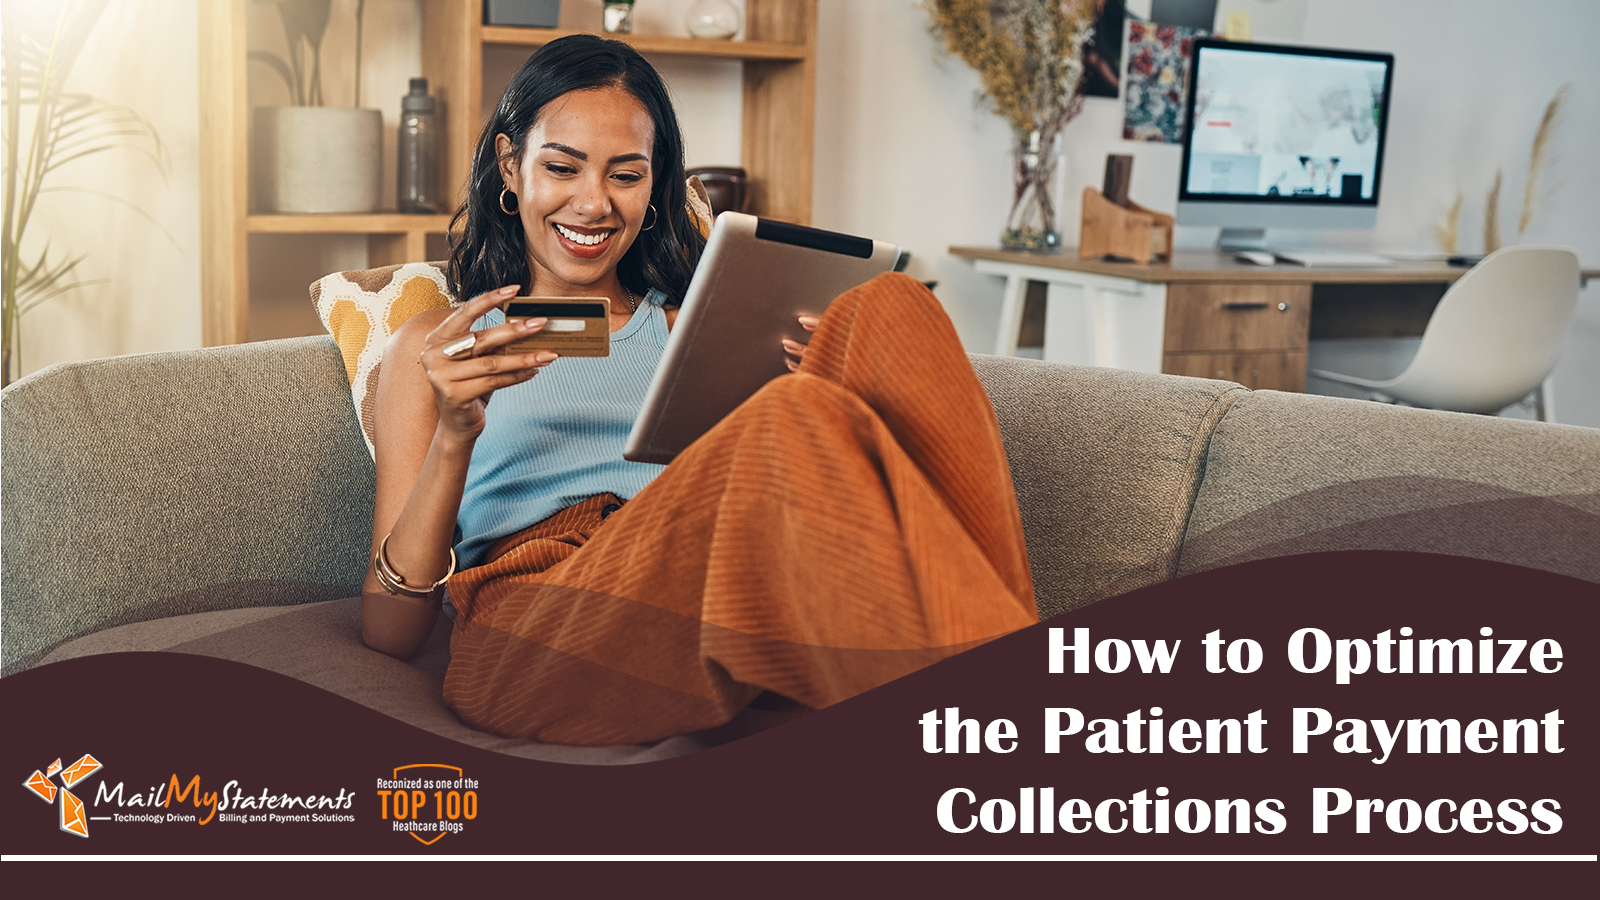 How to Optimize the Patient Payment Collections Process